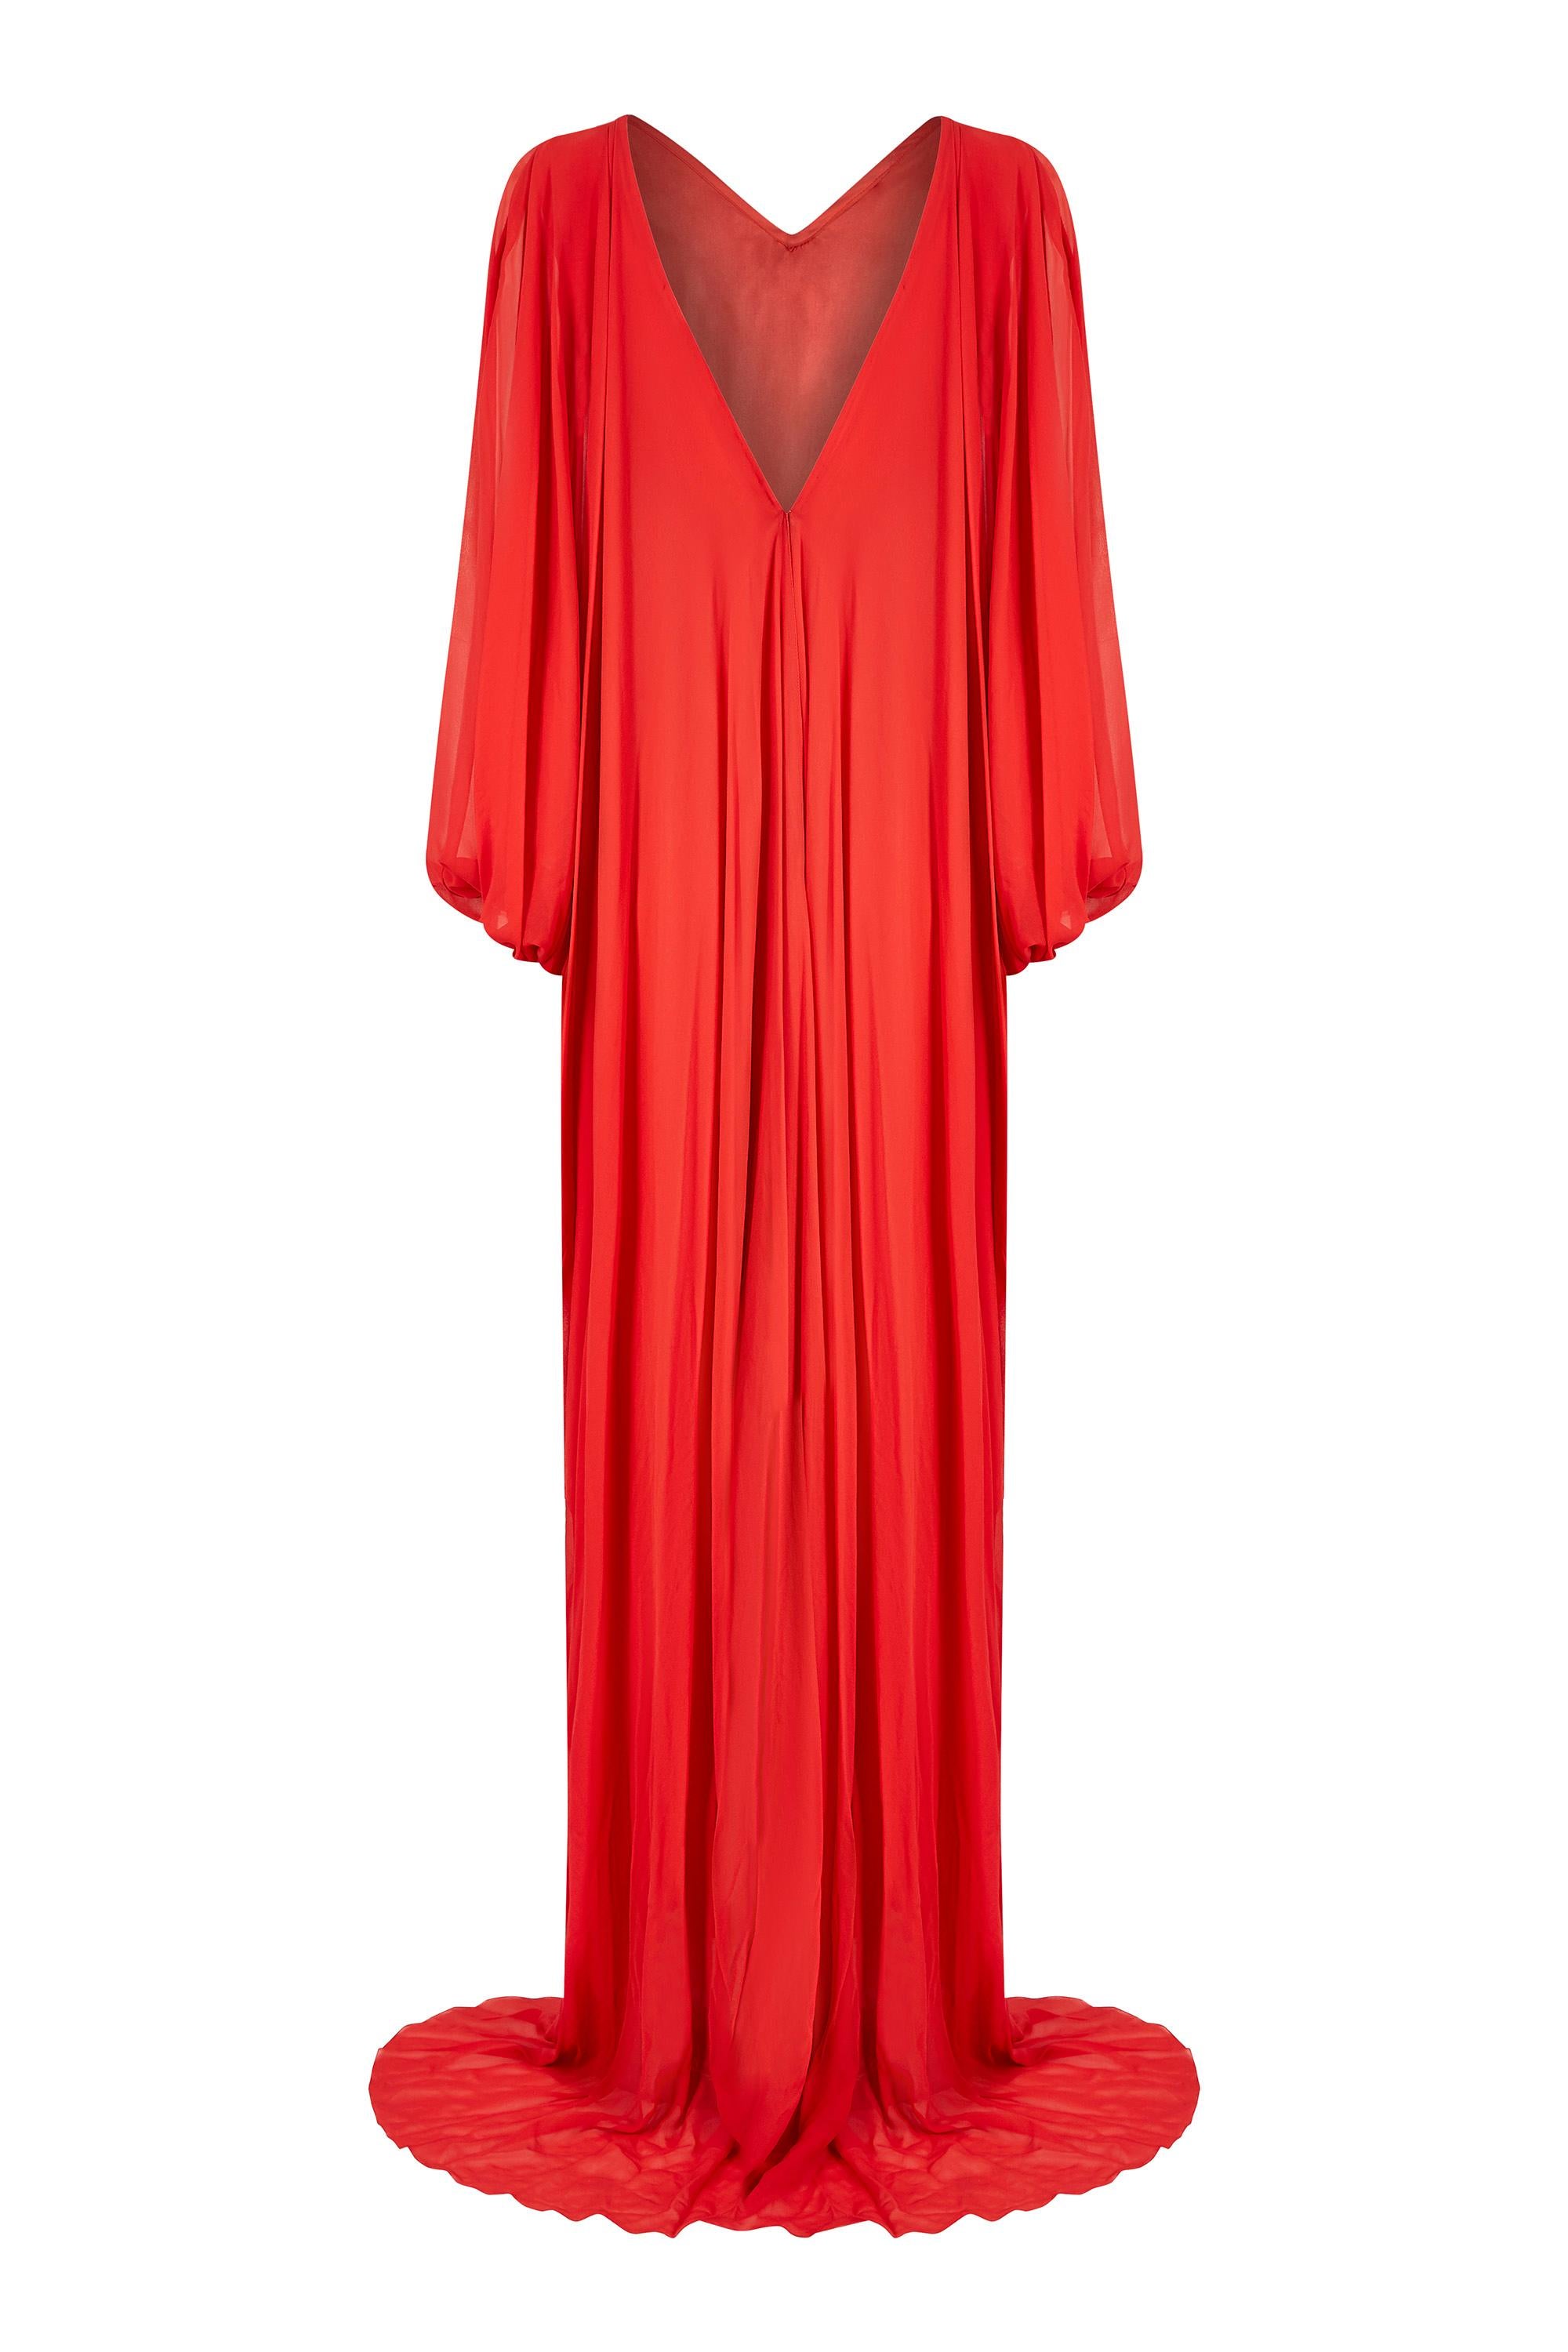 1970s Christian Dior Demi Couture Red Silk Chiffon Dress In Excellent Condition For Sale In London, GB